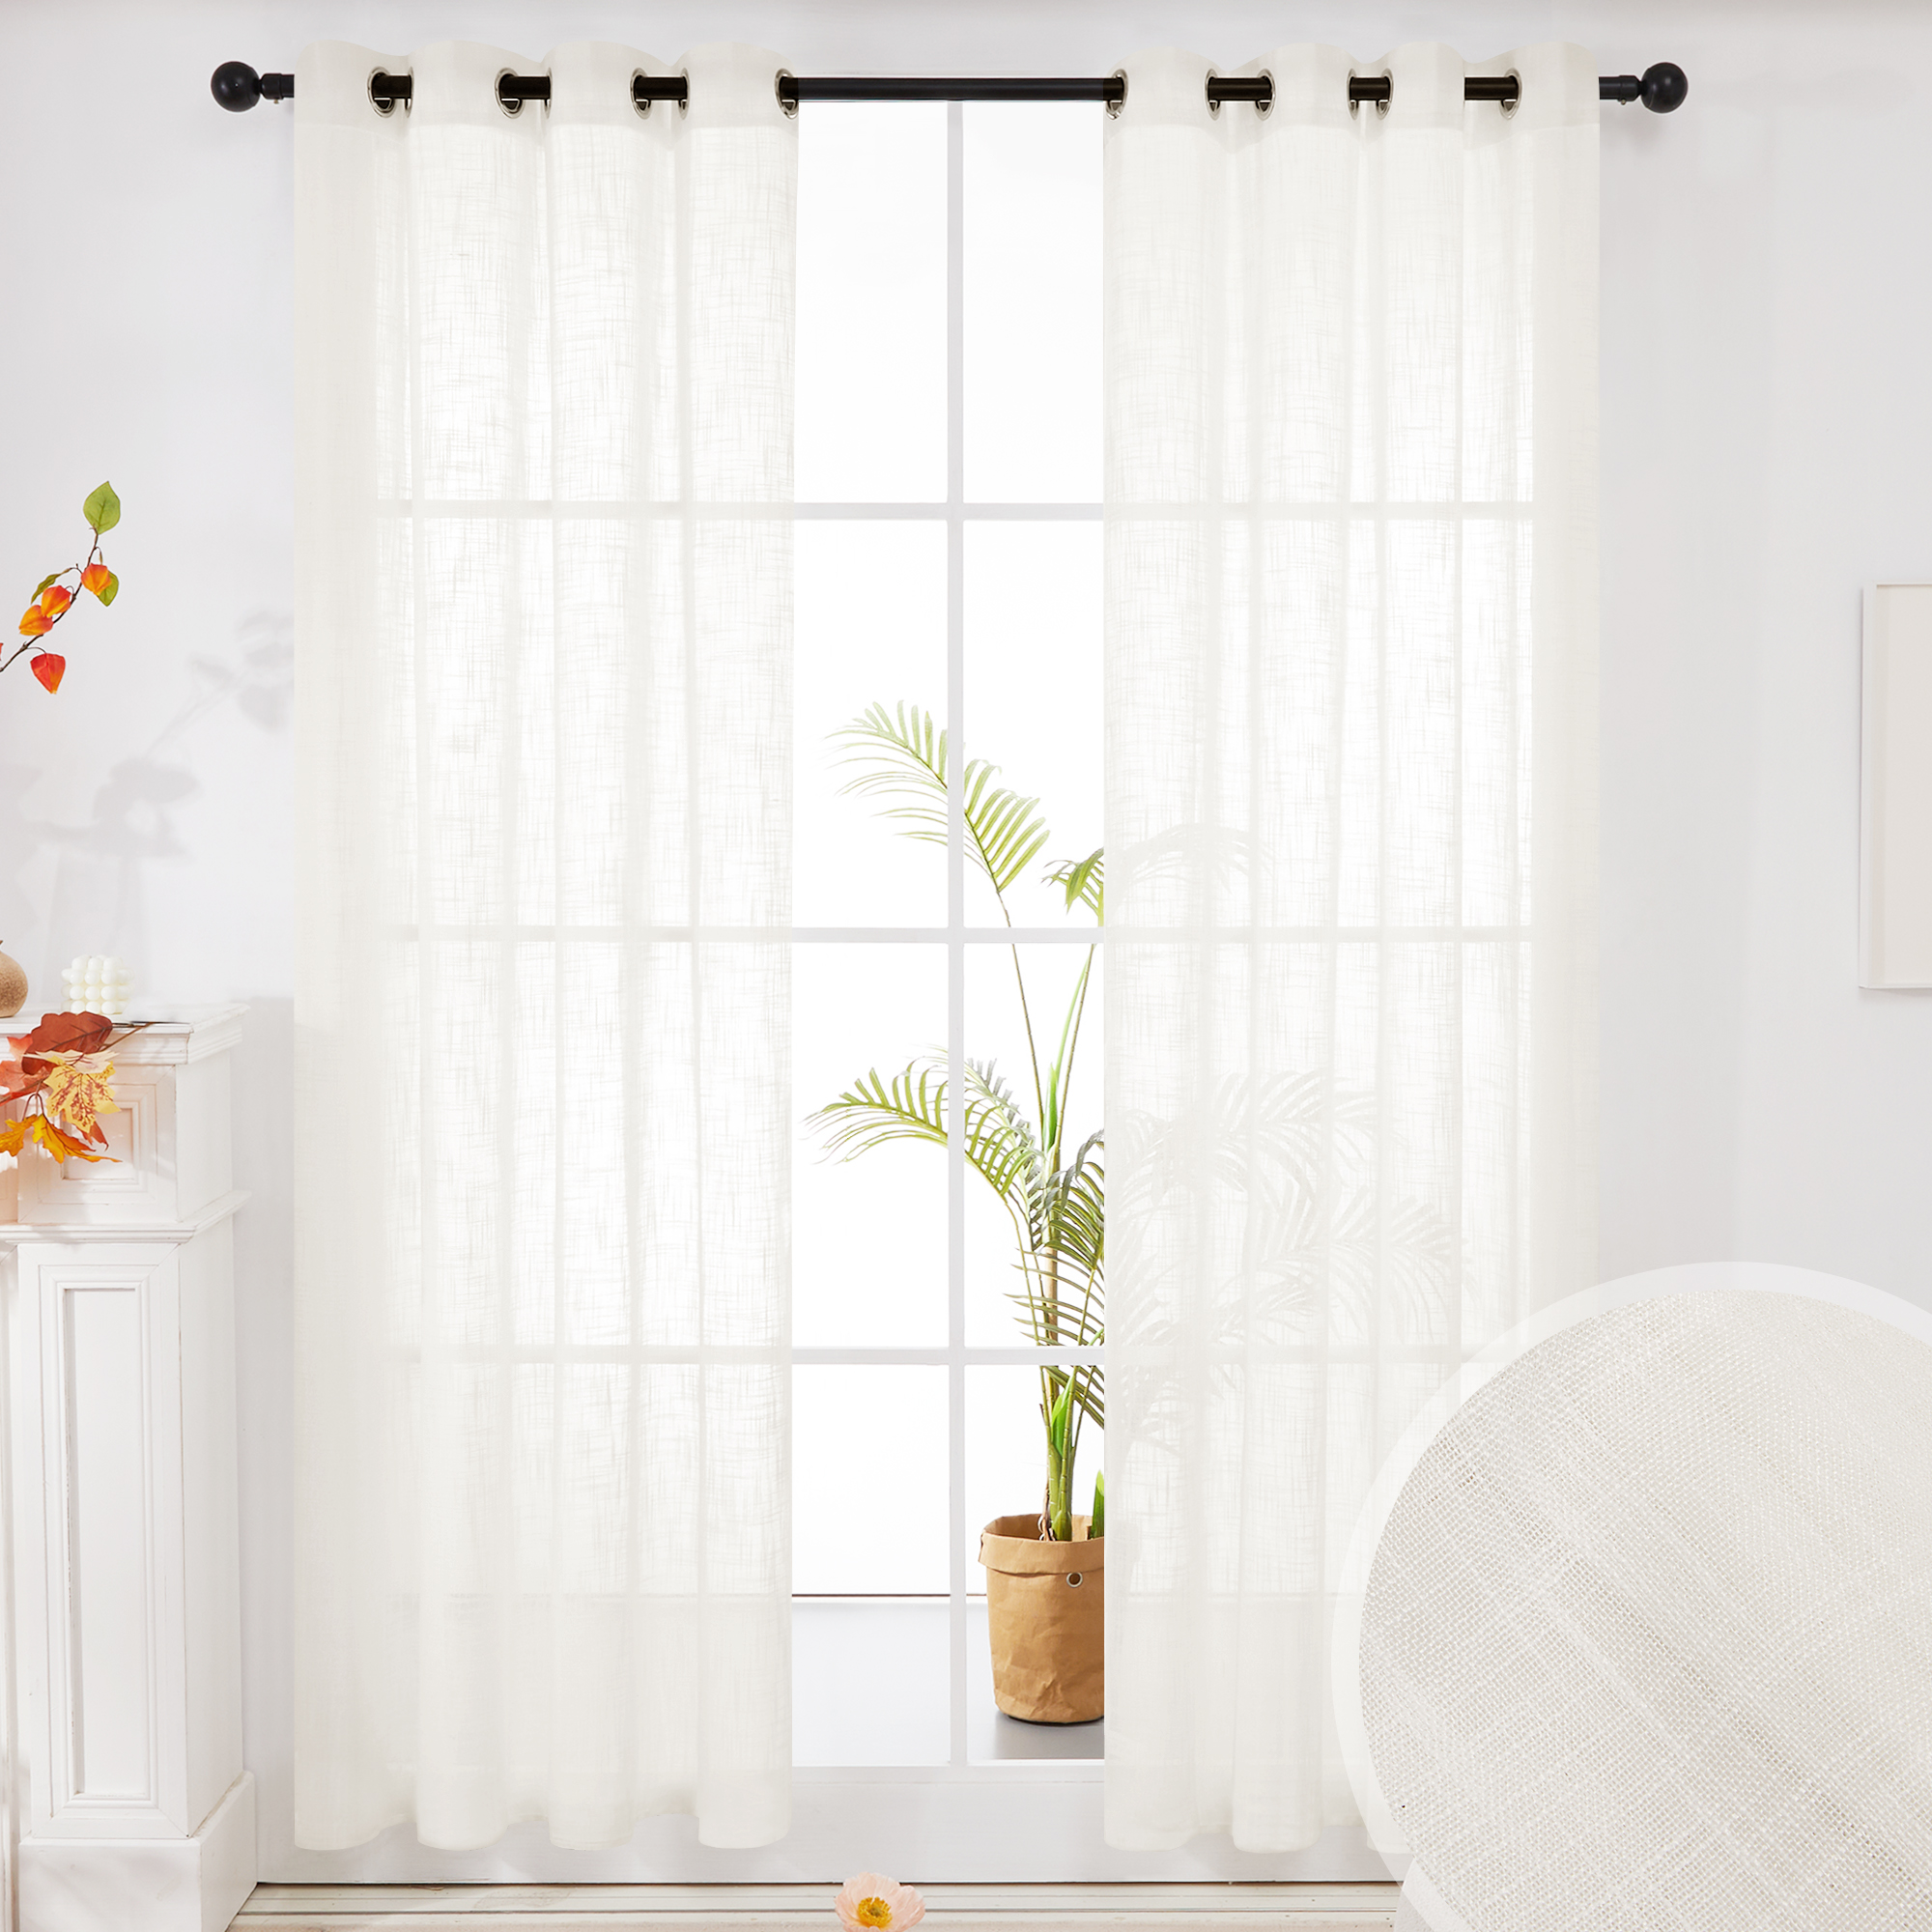 2 Panels Deconovo Faux Linen Semi Sheer Curtains $9.20 - $13.60 + Free Shipping w/ Prime or $25+